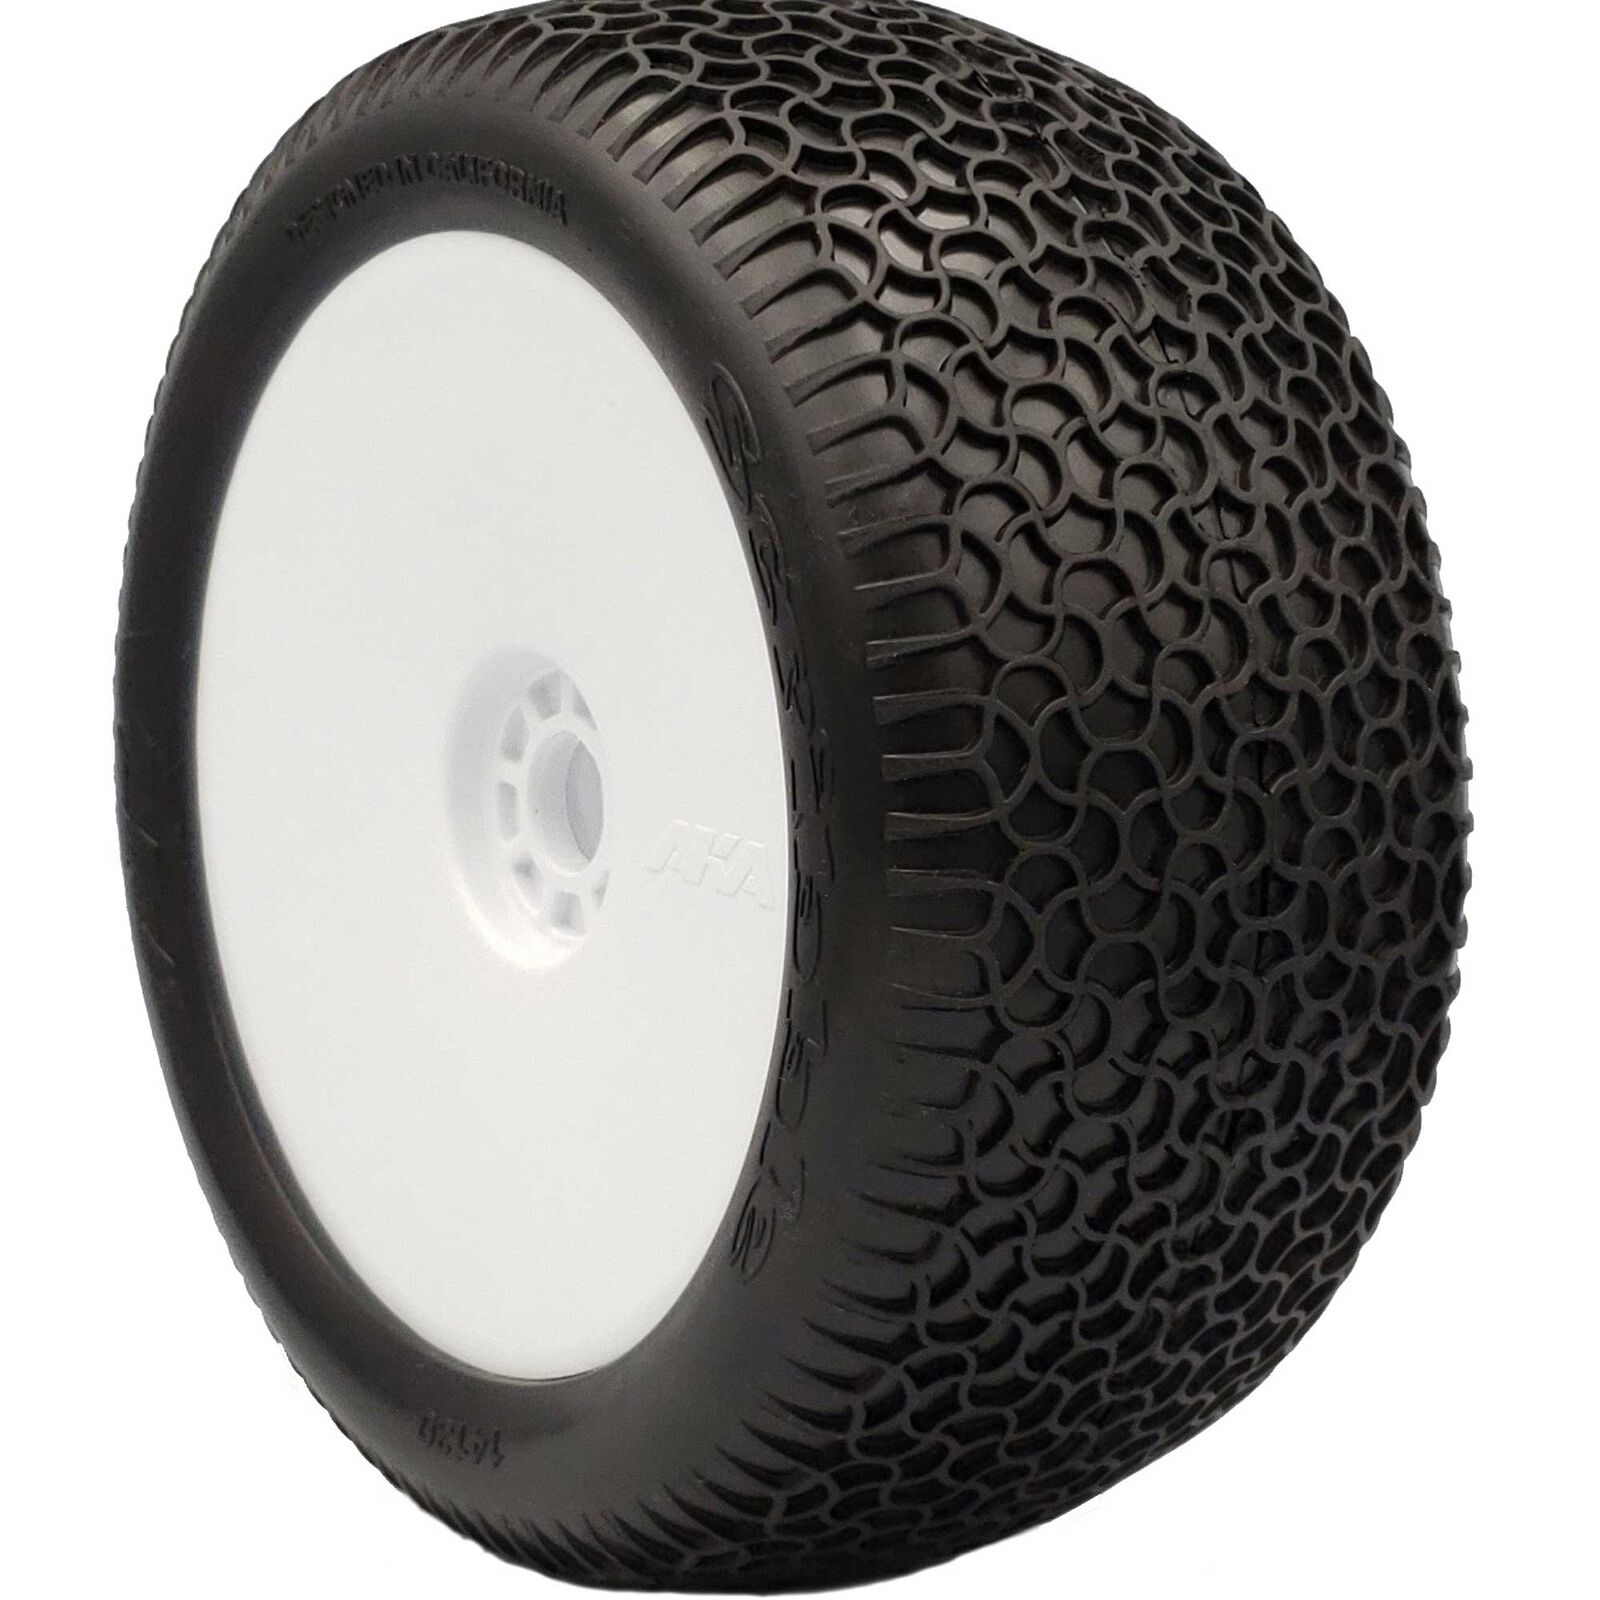 1/8 EVO Scribble Super Soft Long Wear Pre-Mounted Tires, White Wheels (2): Truggy